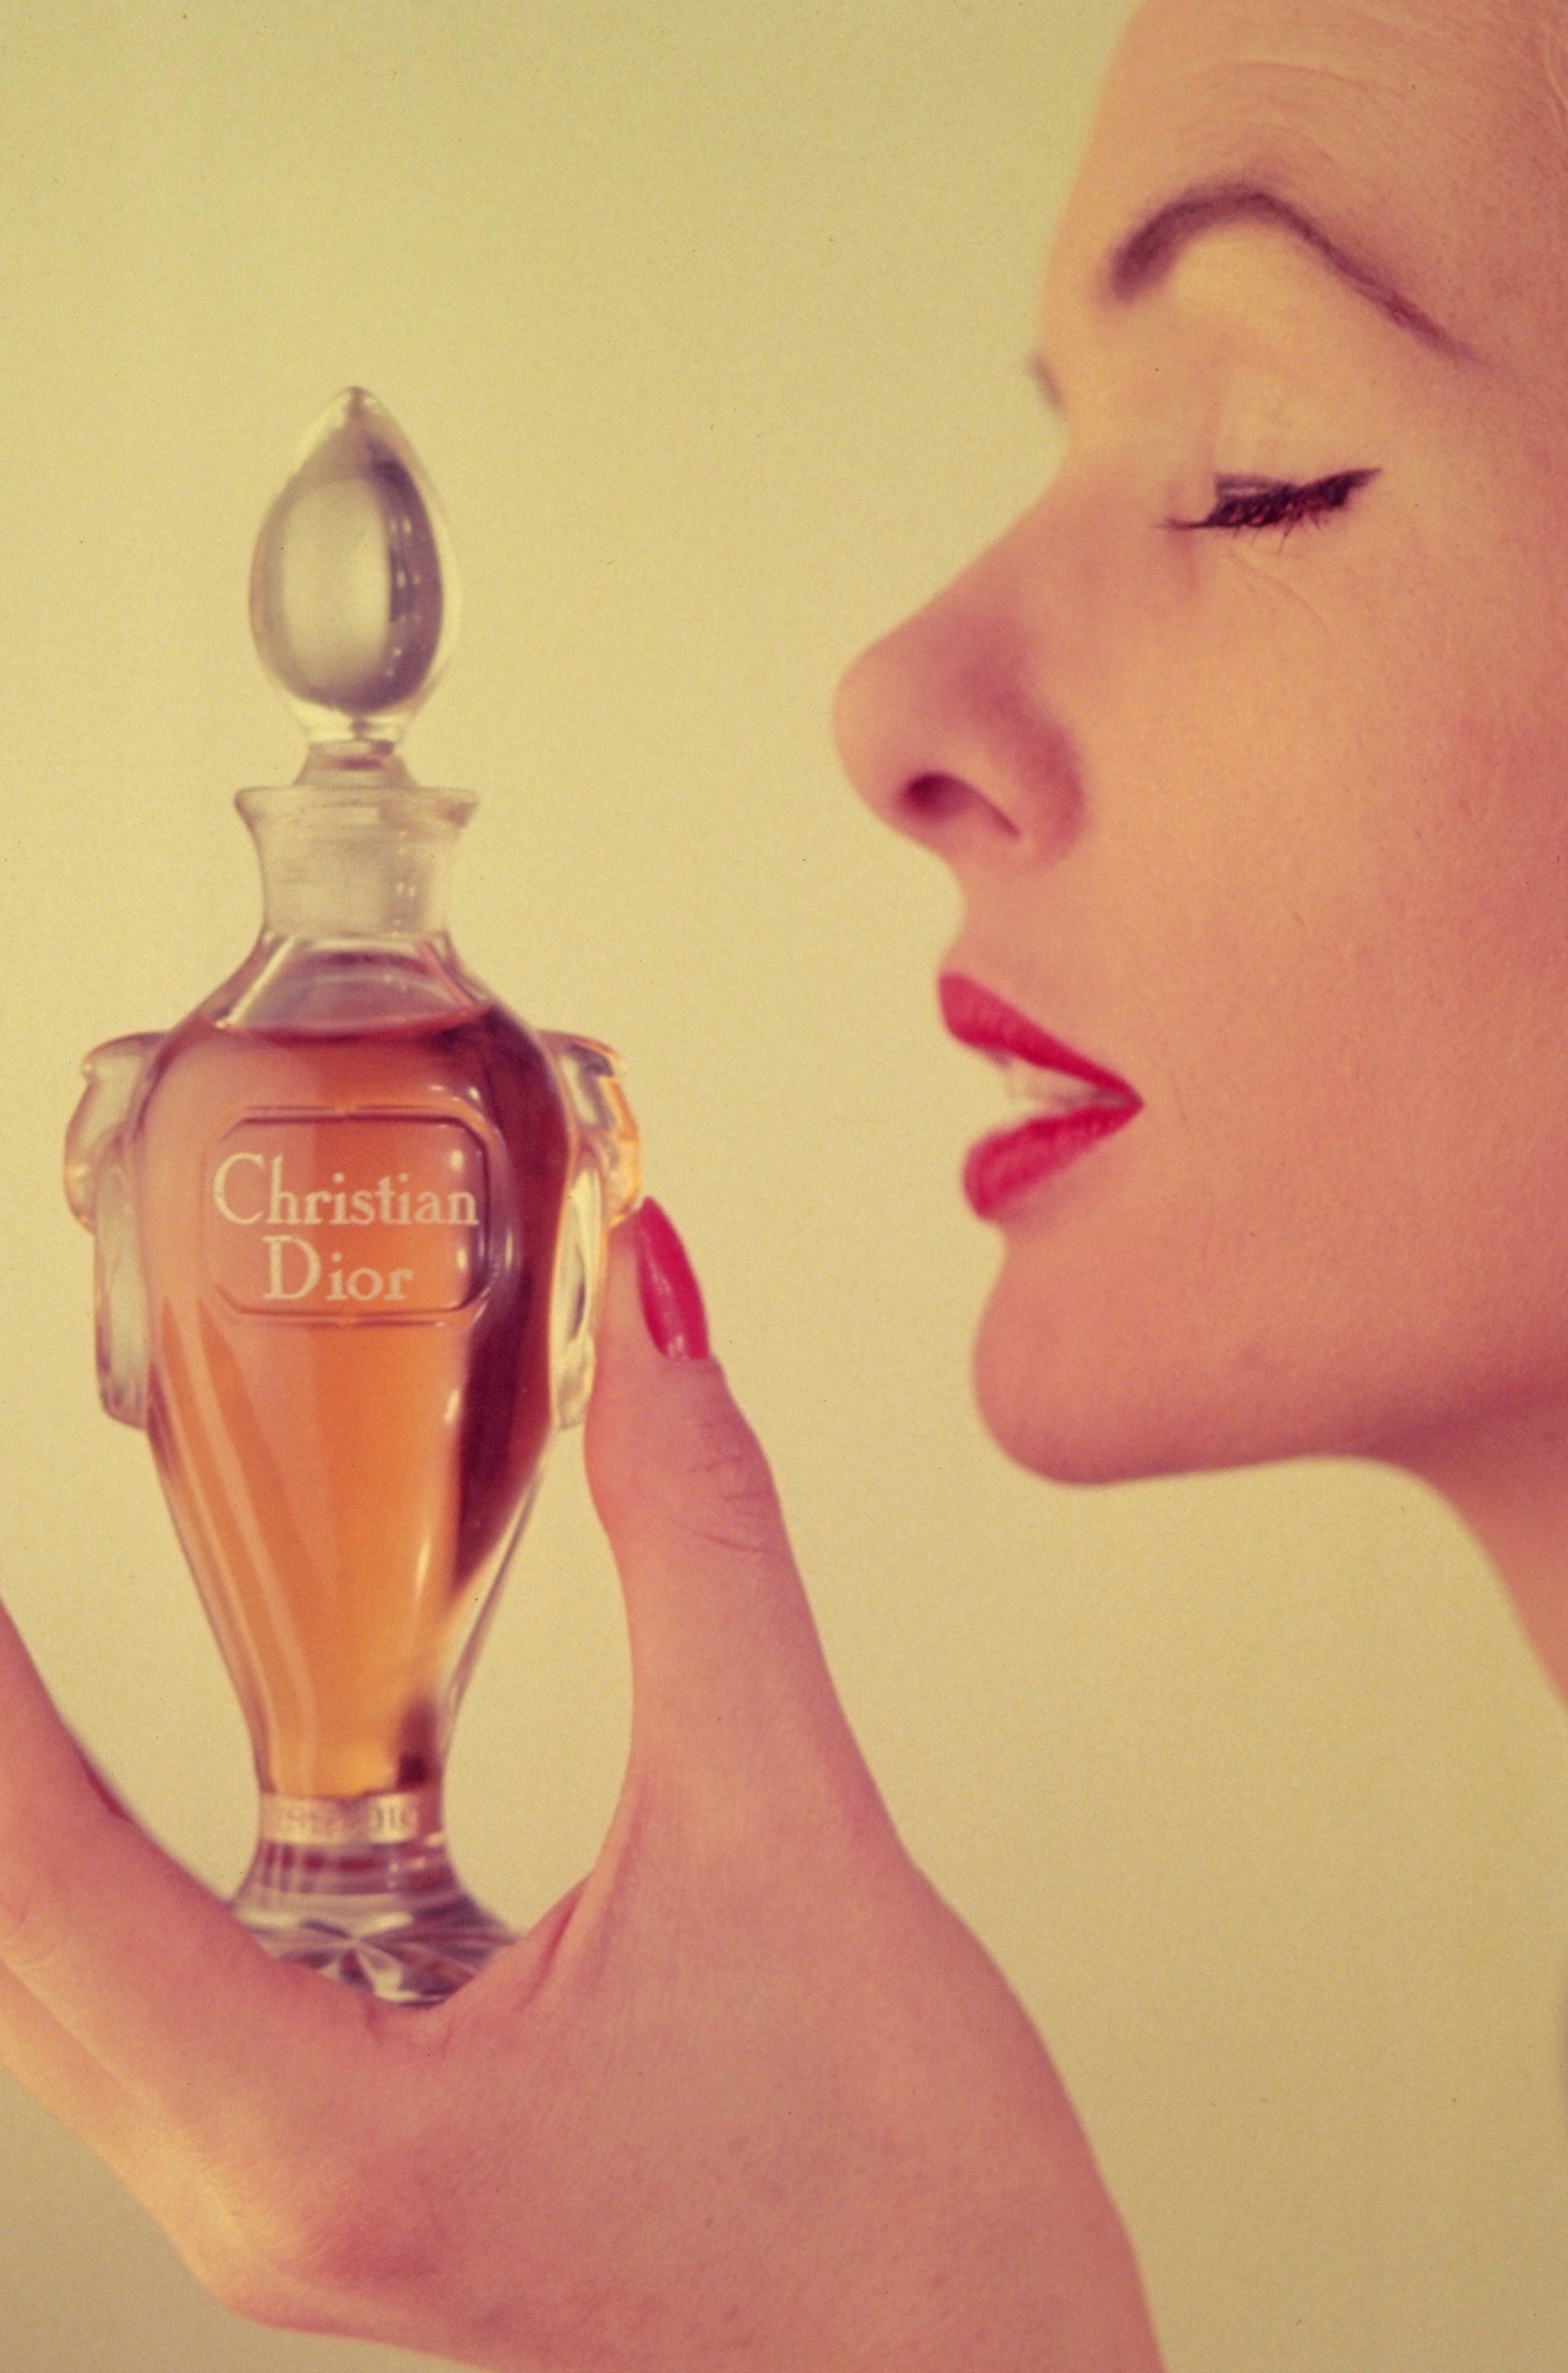 A woman holding a bottle of Miss Dior perfume by Christian Dior, December 1954. The half ounce flagon is presented in a Baccarat crystal bottle, and costs 6 pounds, 19 shillings. (Photo by Housewife/Getty Images)